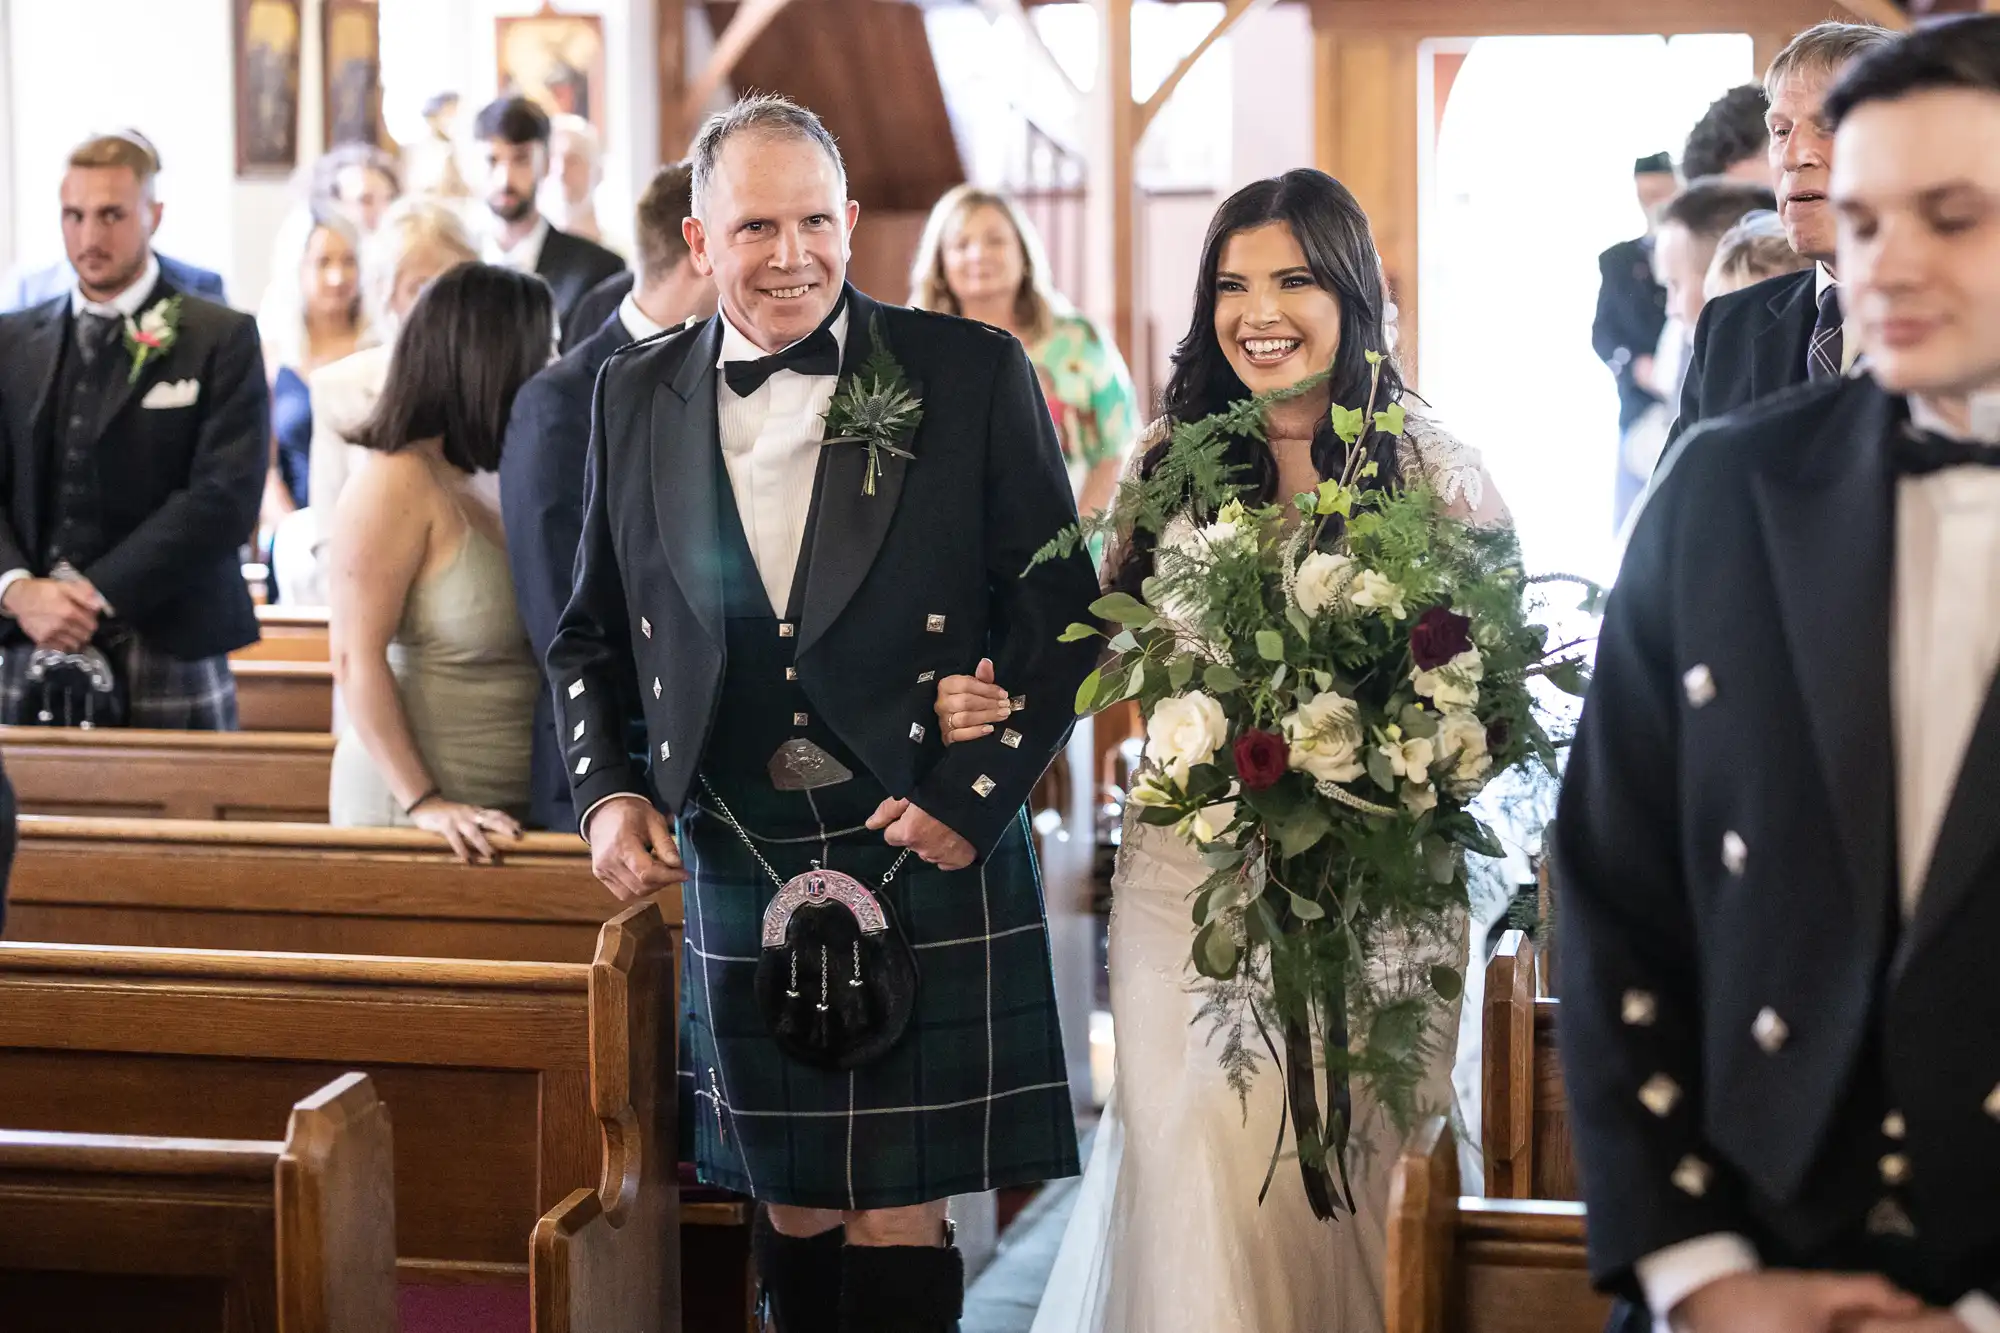 A bride and her father walking down the aisle, the father in a kilt and the bride holding a large bouquet, with guests watching from the pews.